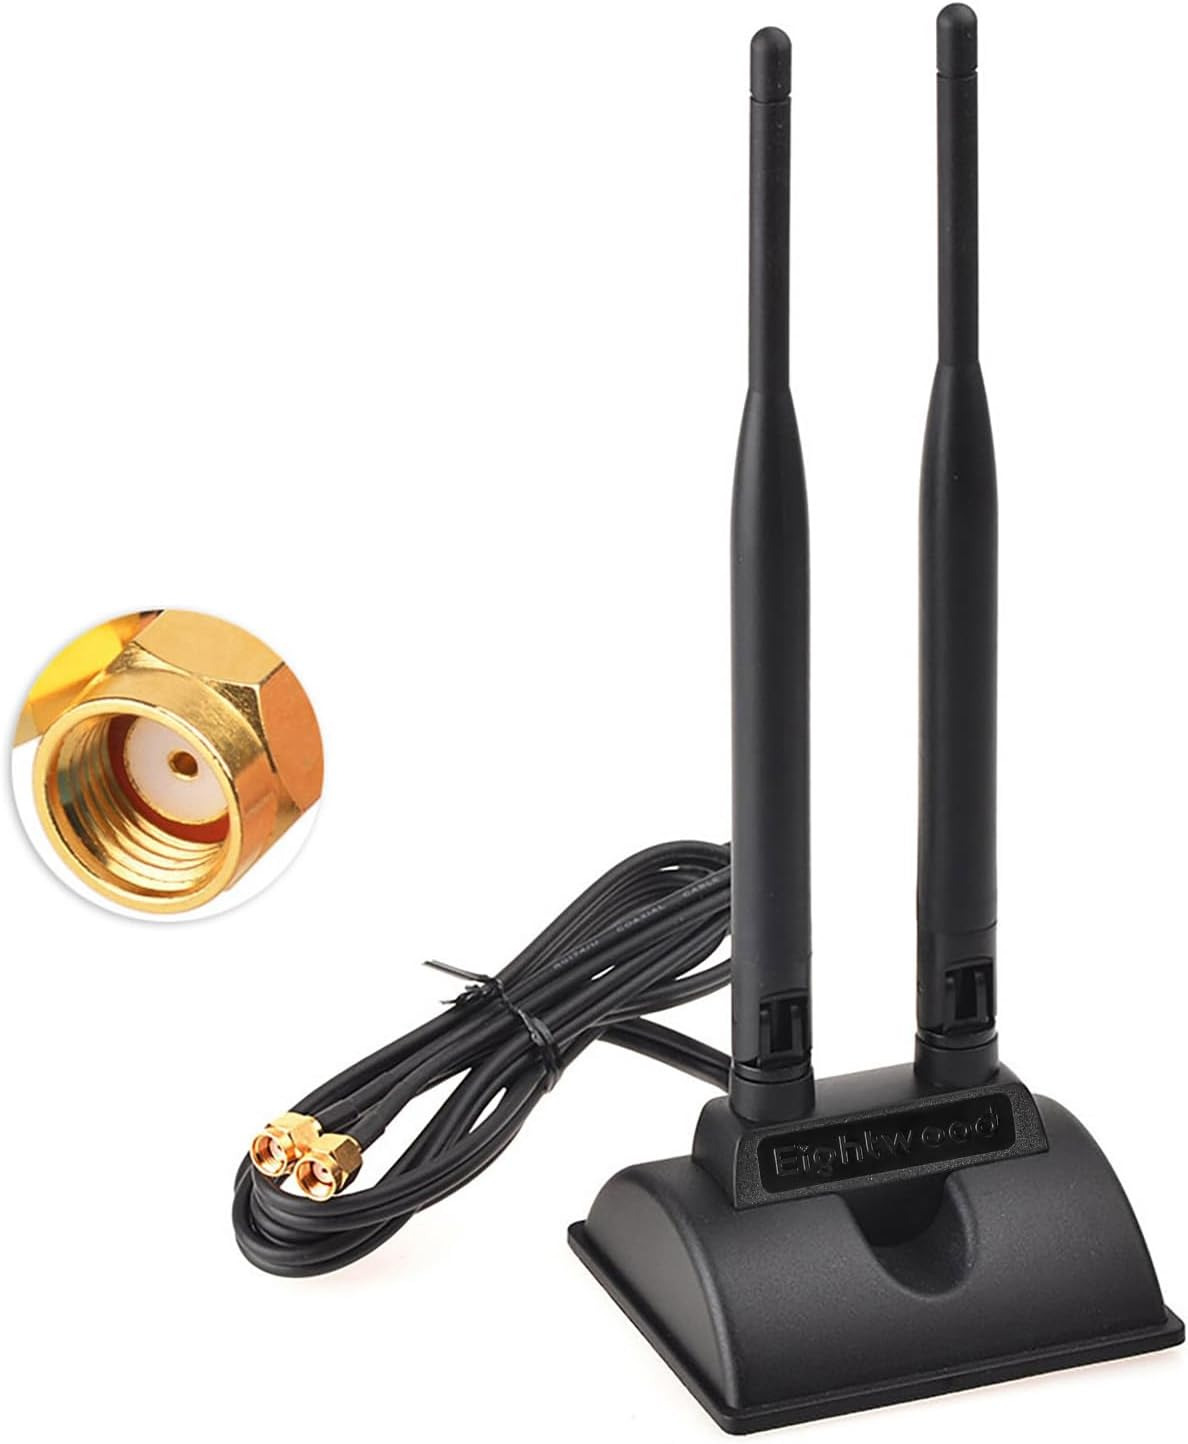 Eightwood Wifi Antenna with RP-SMA Male Connector, 2.4Ghz 5Ghz Dual Band Antenna